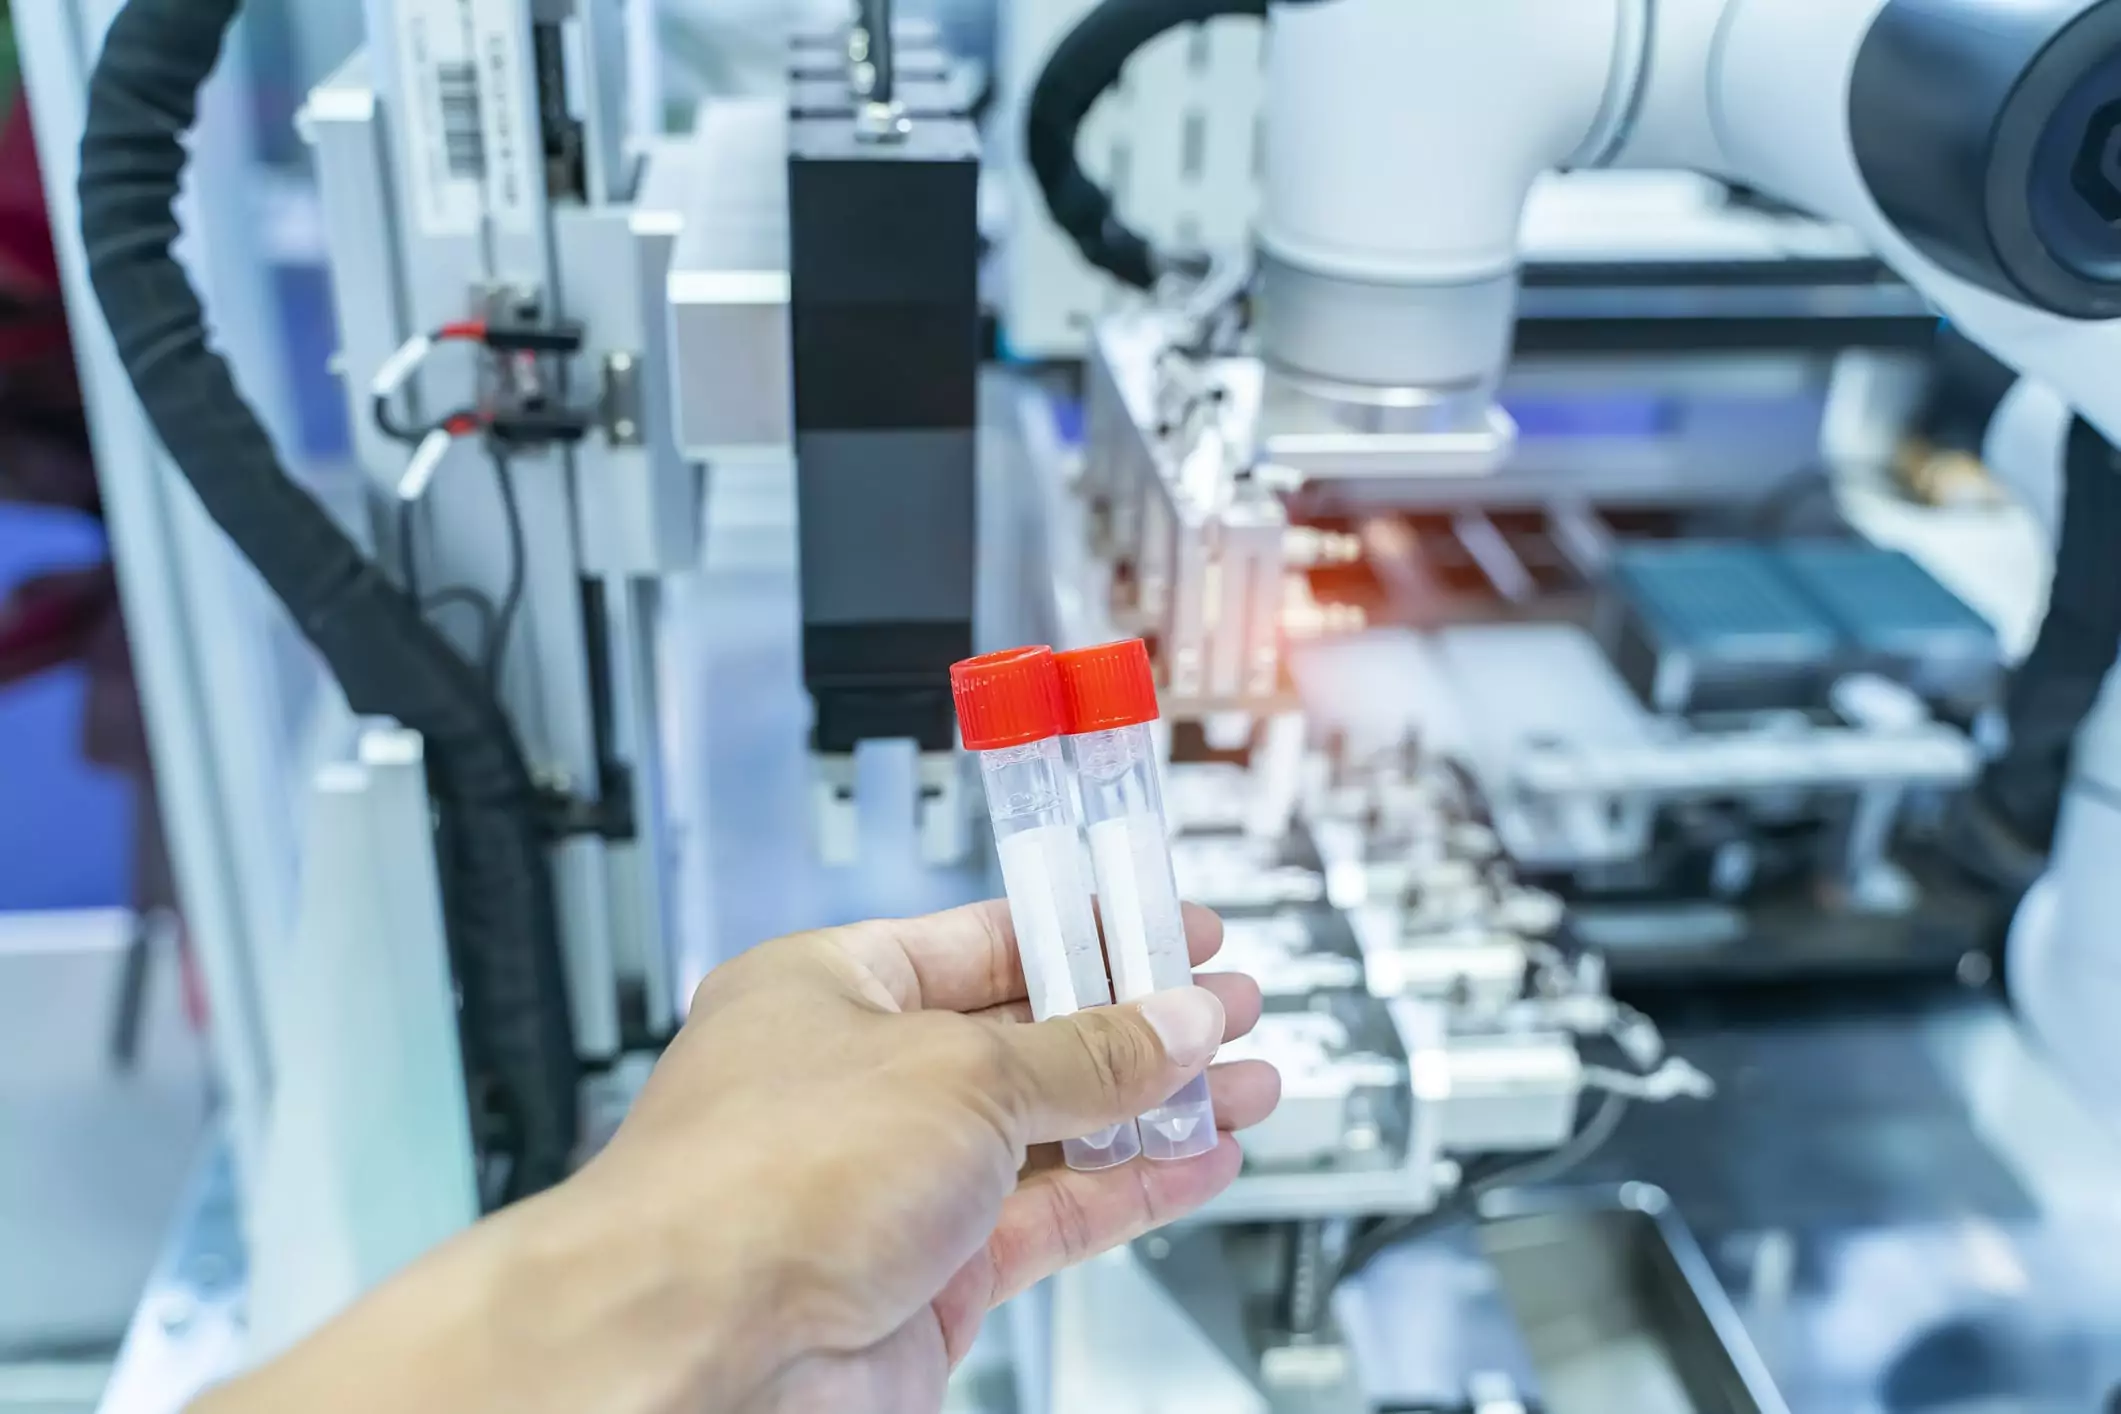 Facing an FDA audit in the medical device manufacturing industry